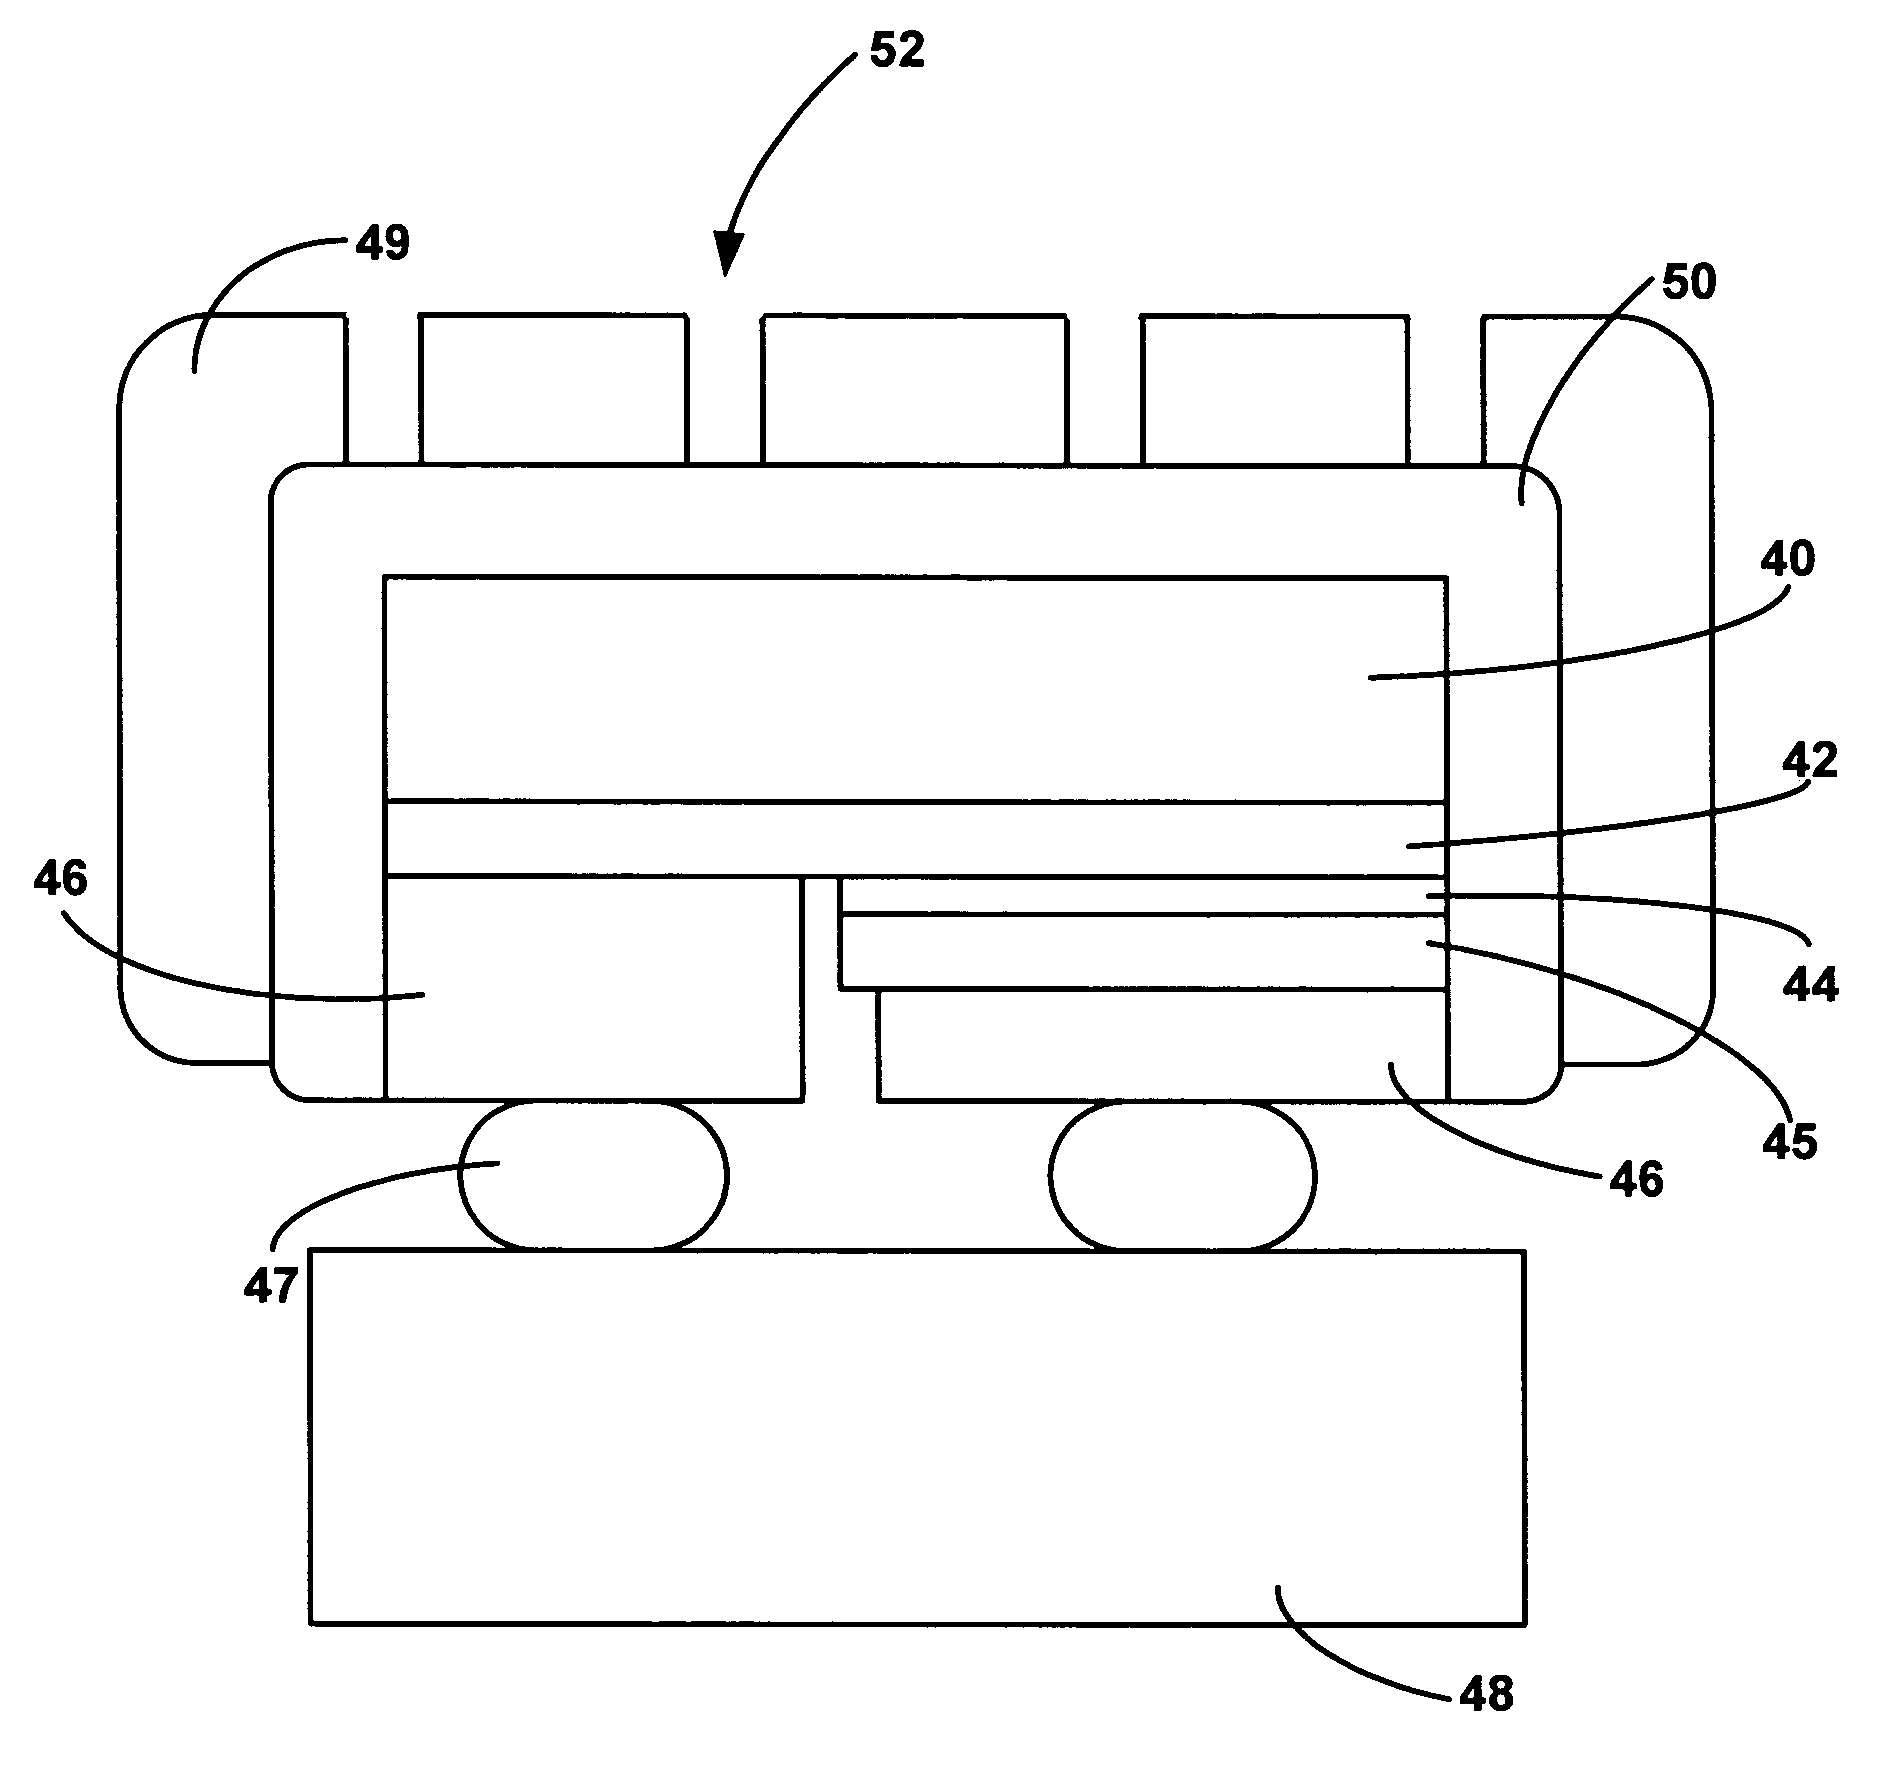 Semiconductor light emitting device including photonic band gap material and luminescent material